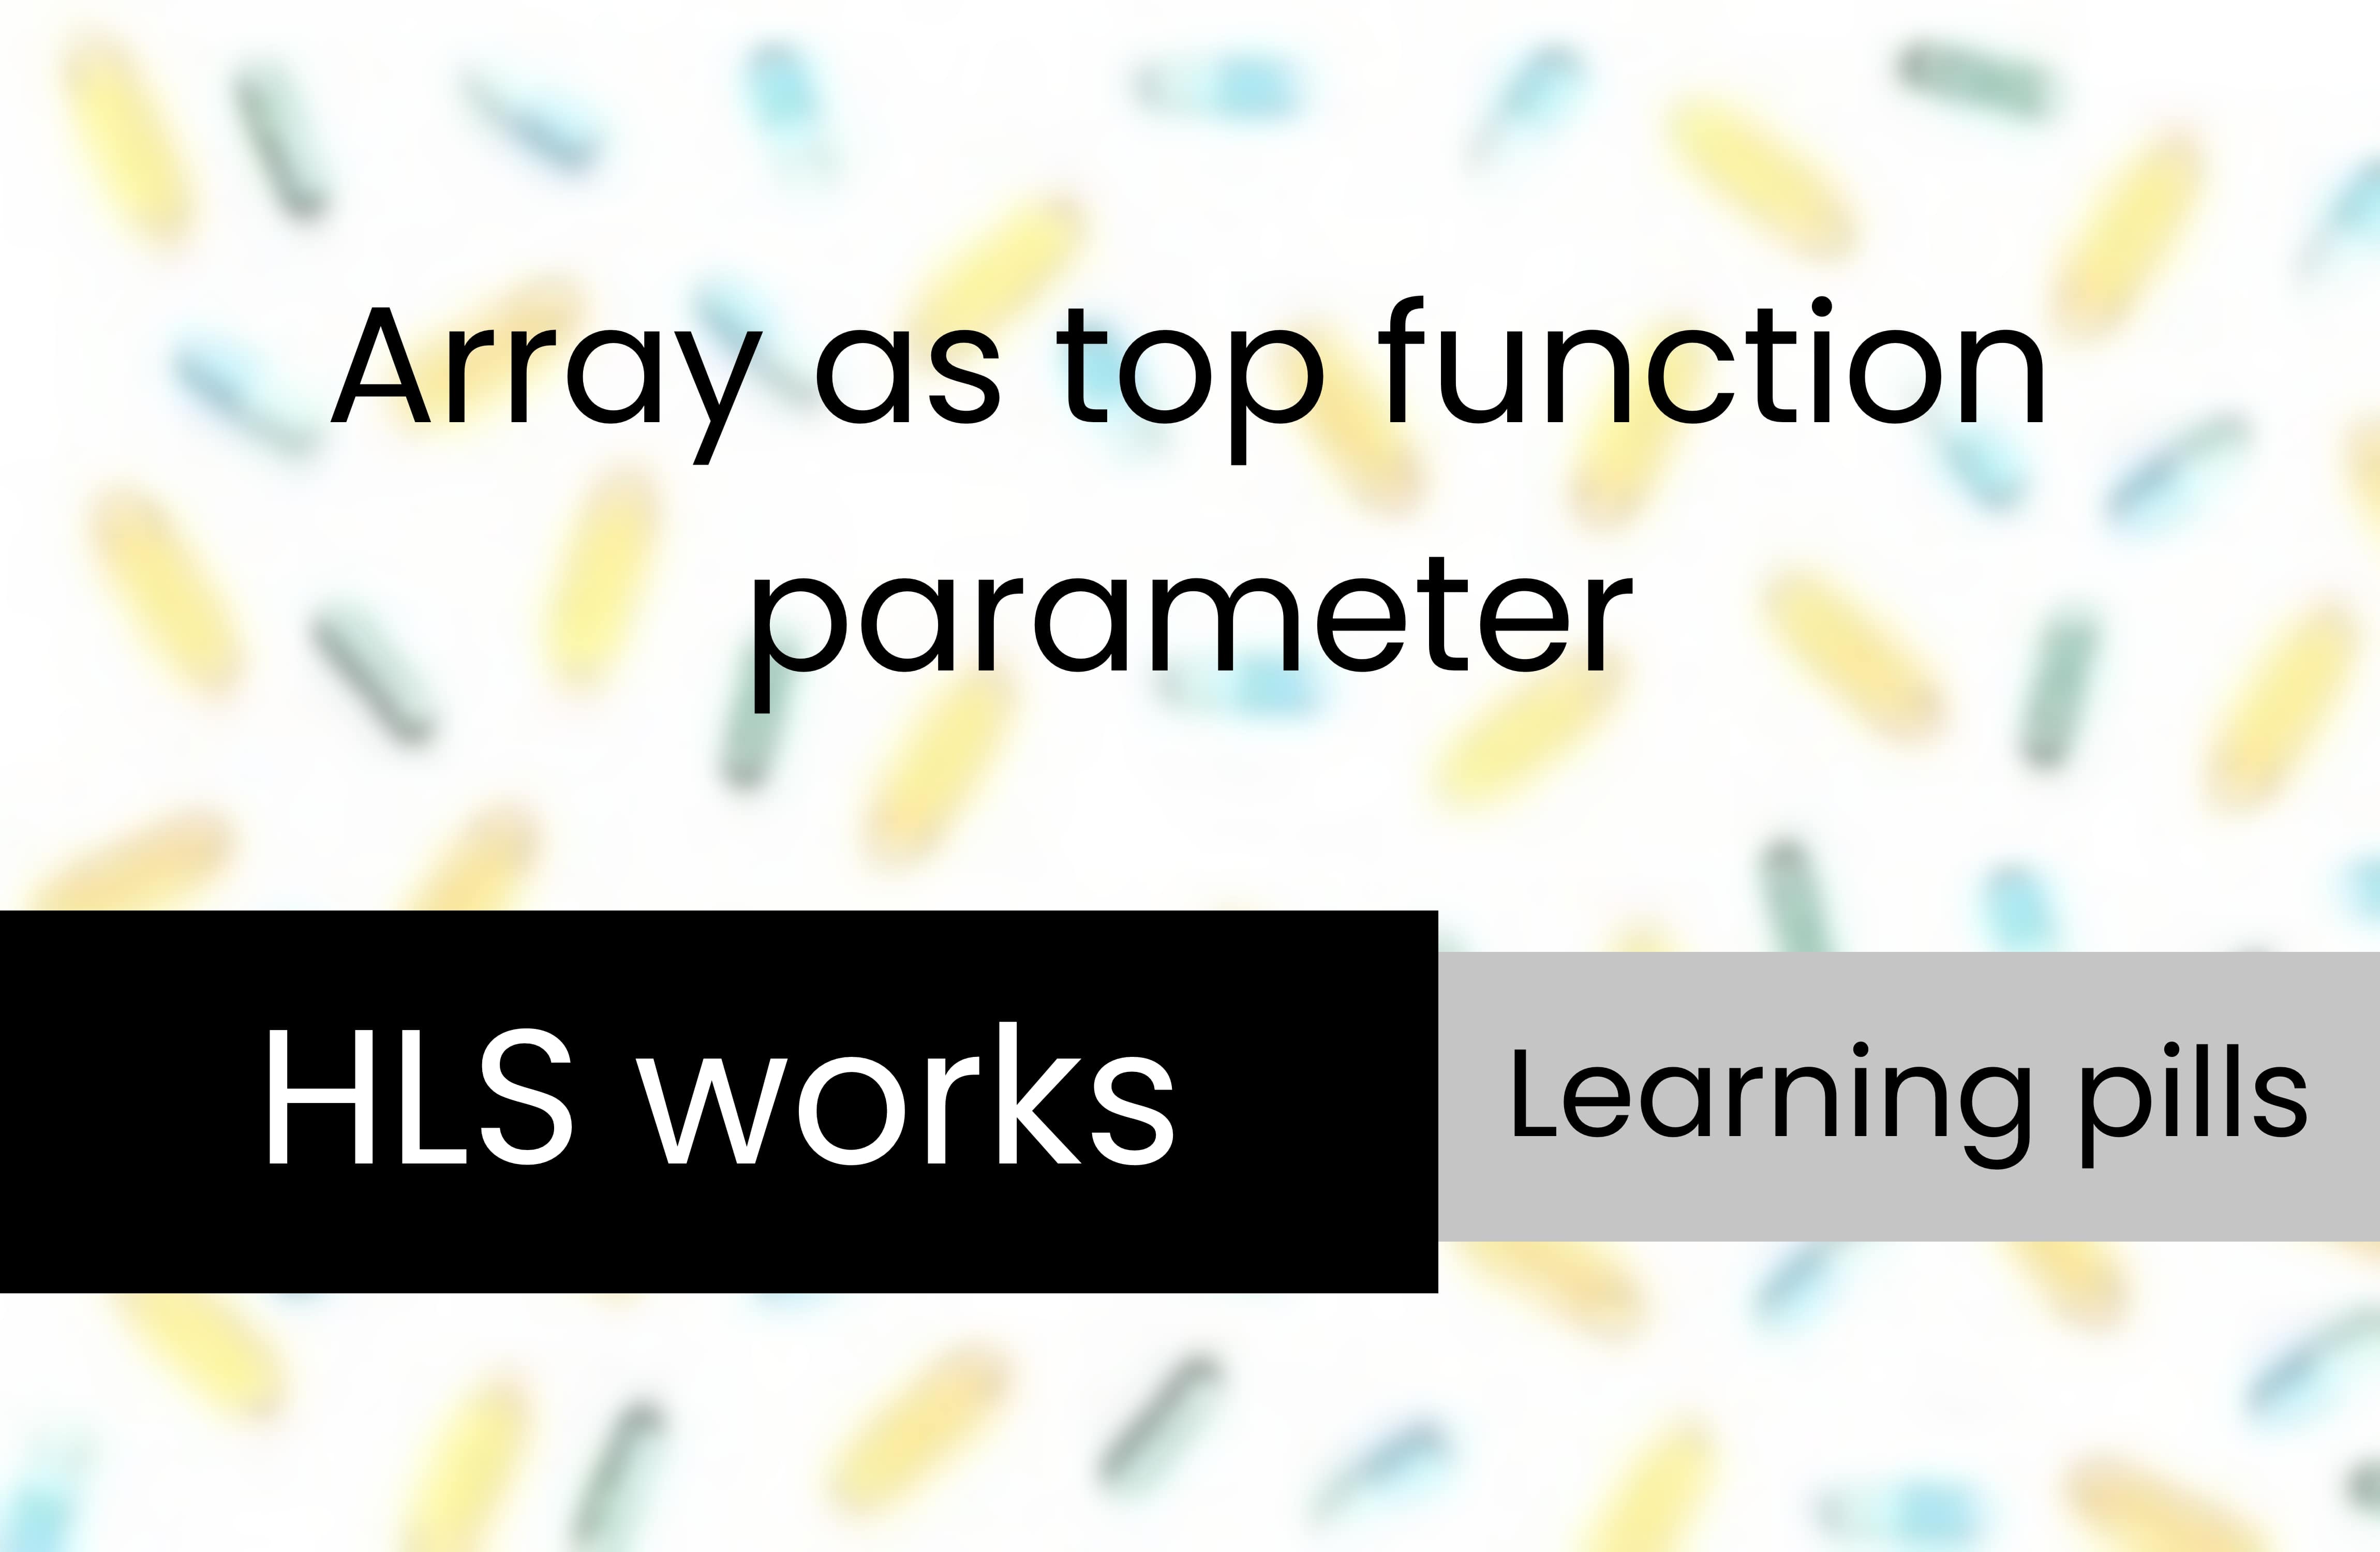 Learning pills - Array as HLS top function parameter